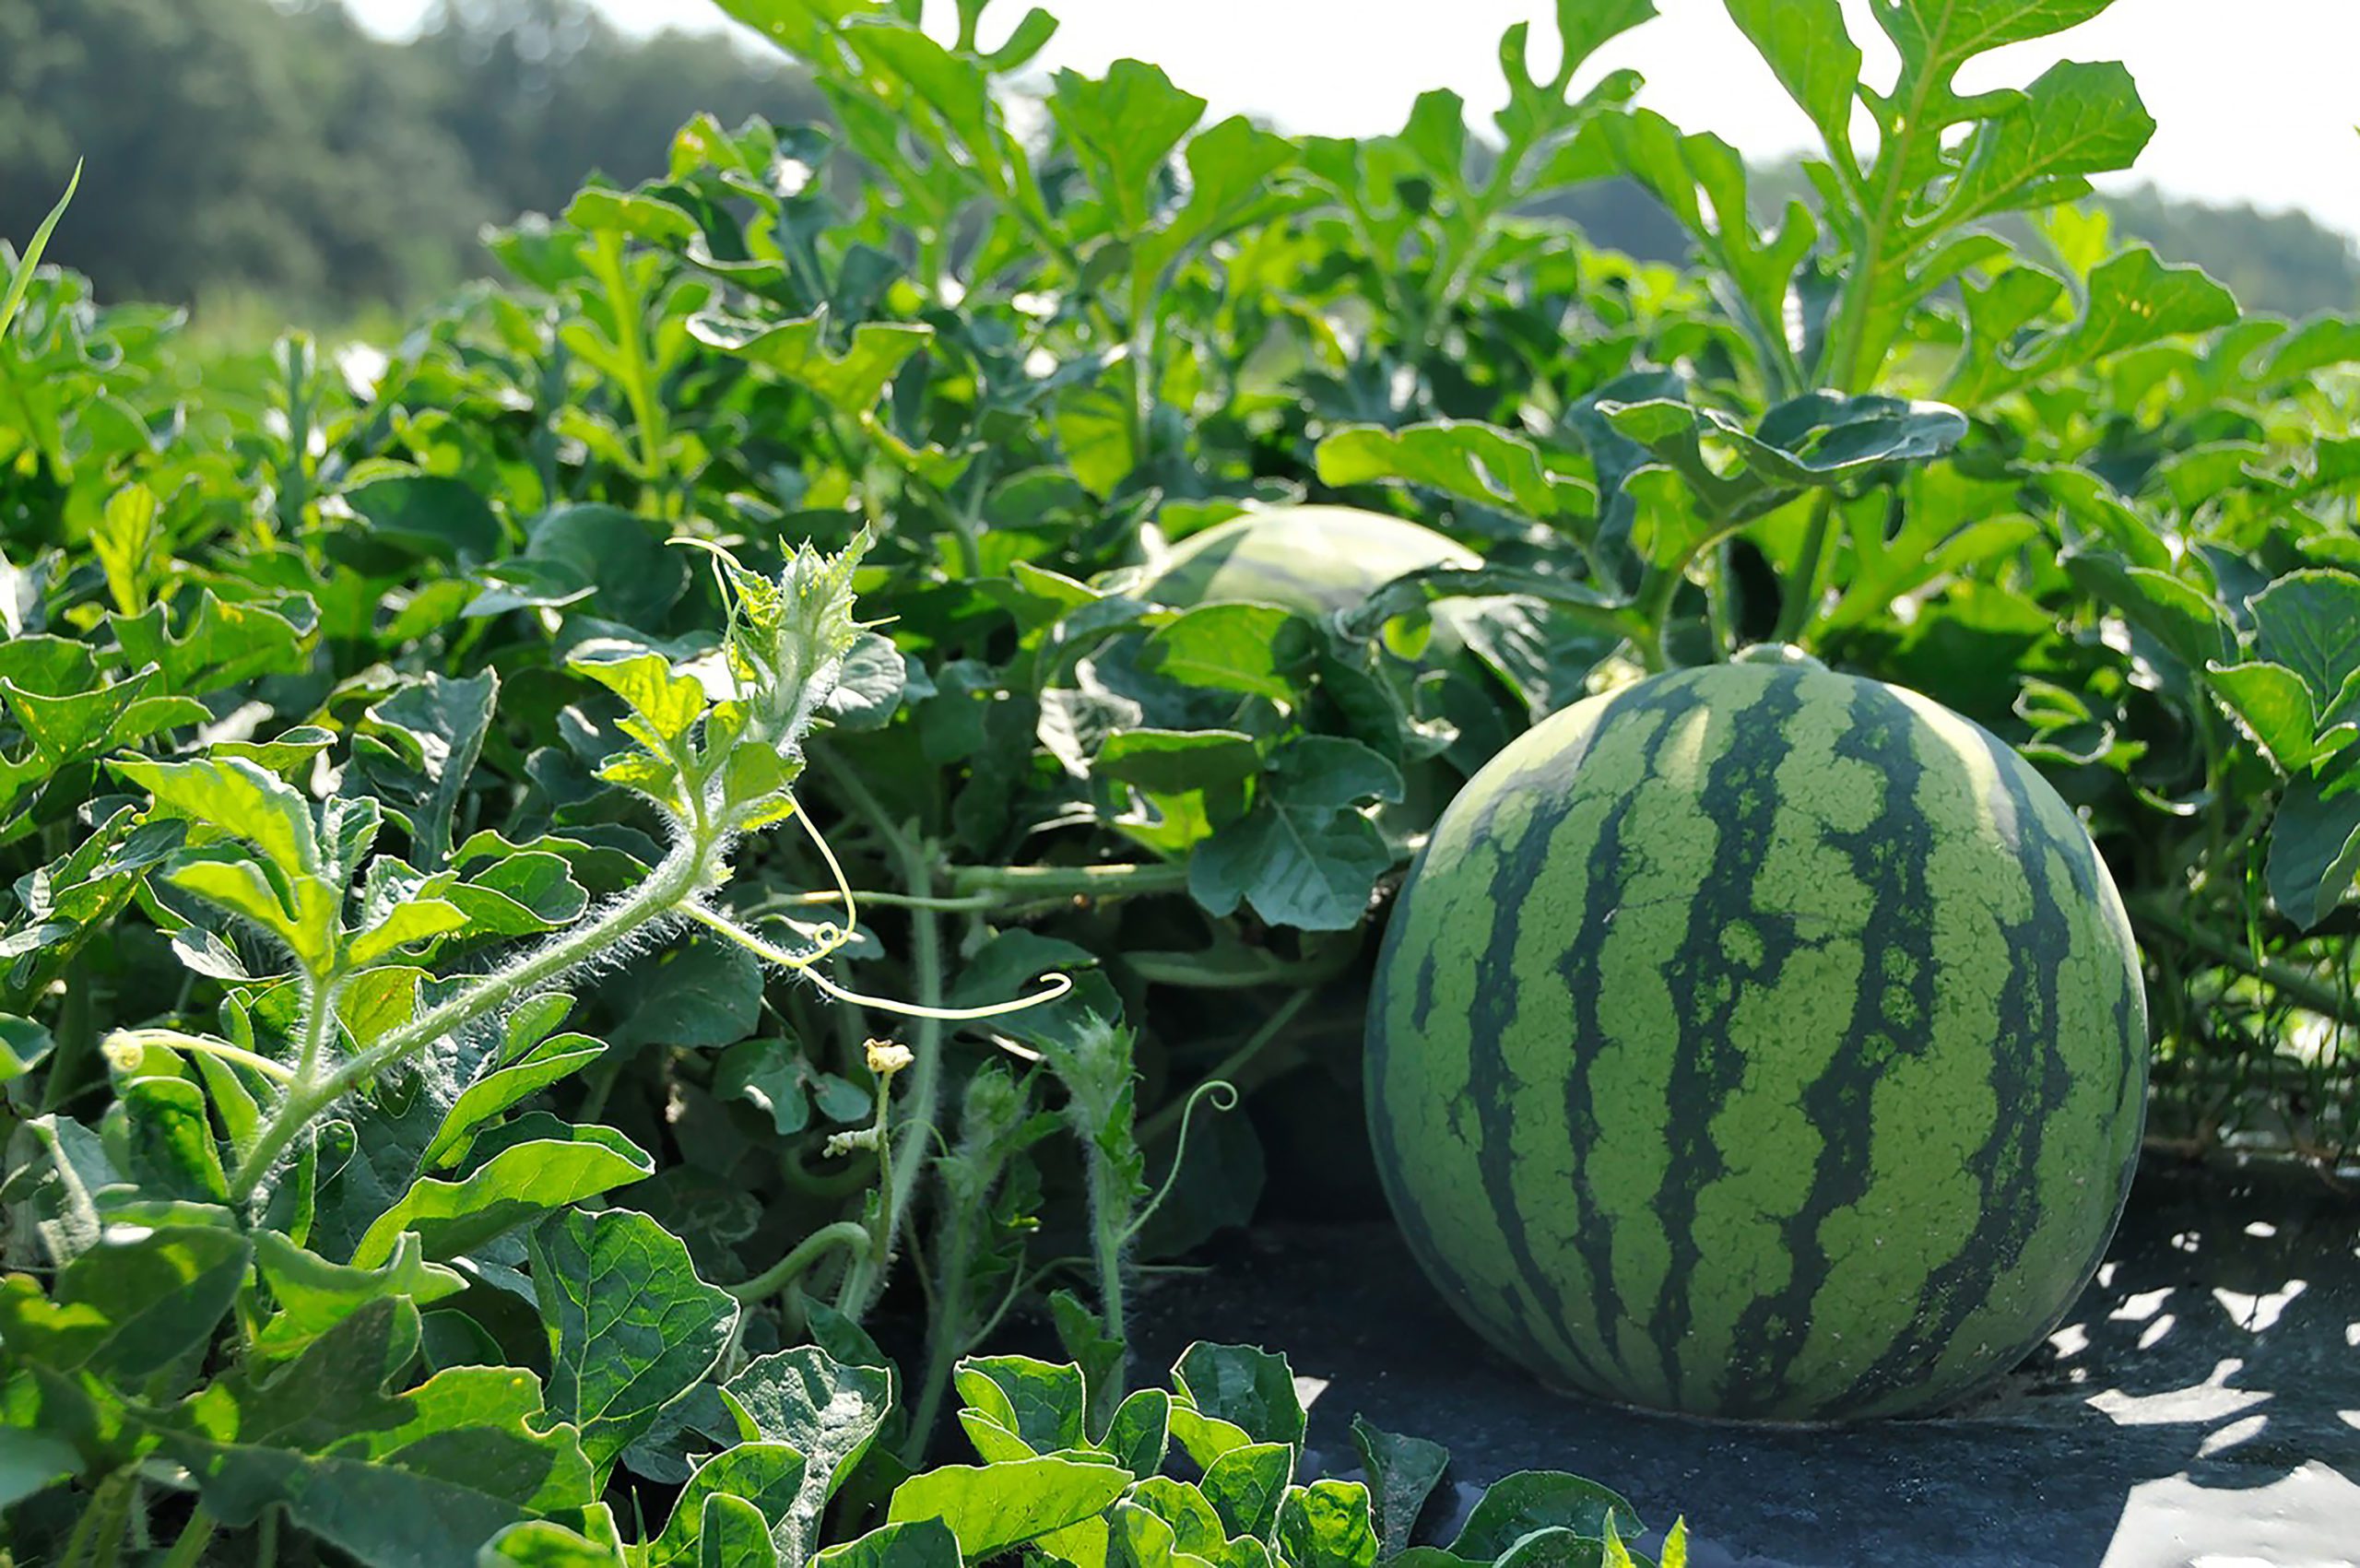 Clemson University researchers have received a USDA grant to find novel ways to improve crop nutrient use efficiency and pest management in organic watermelon.